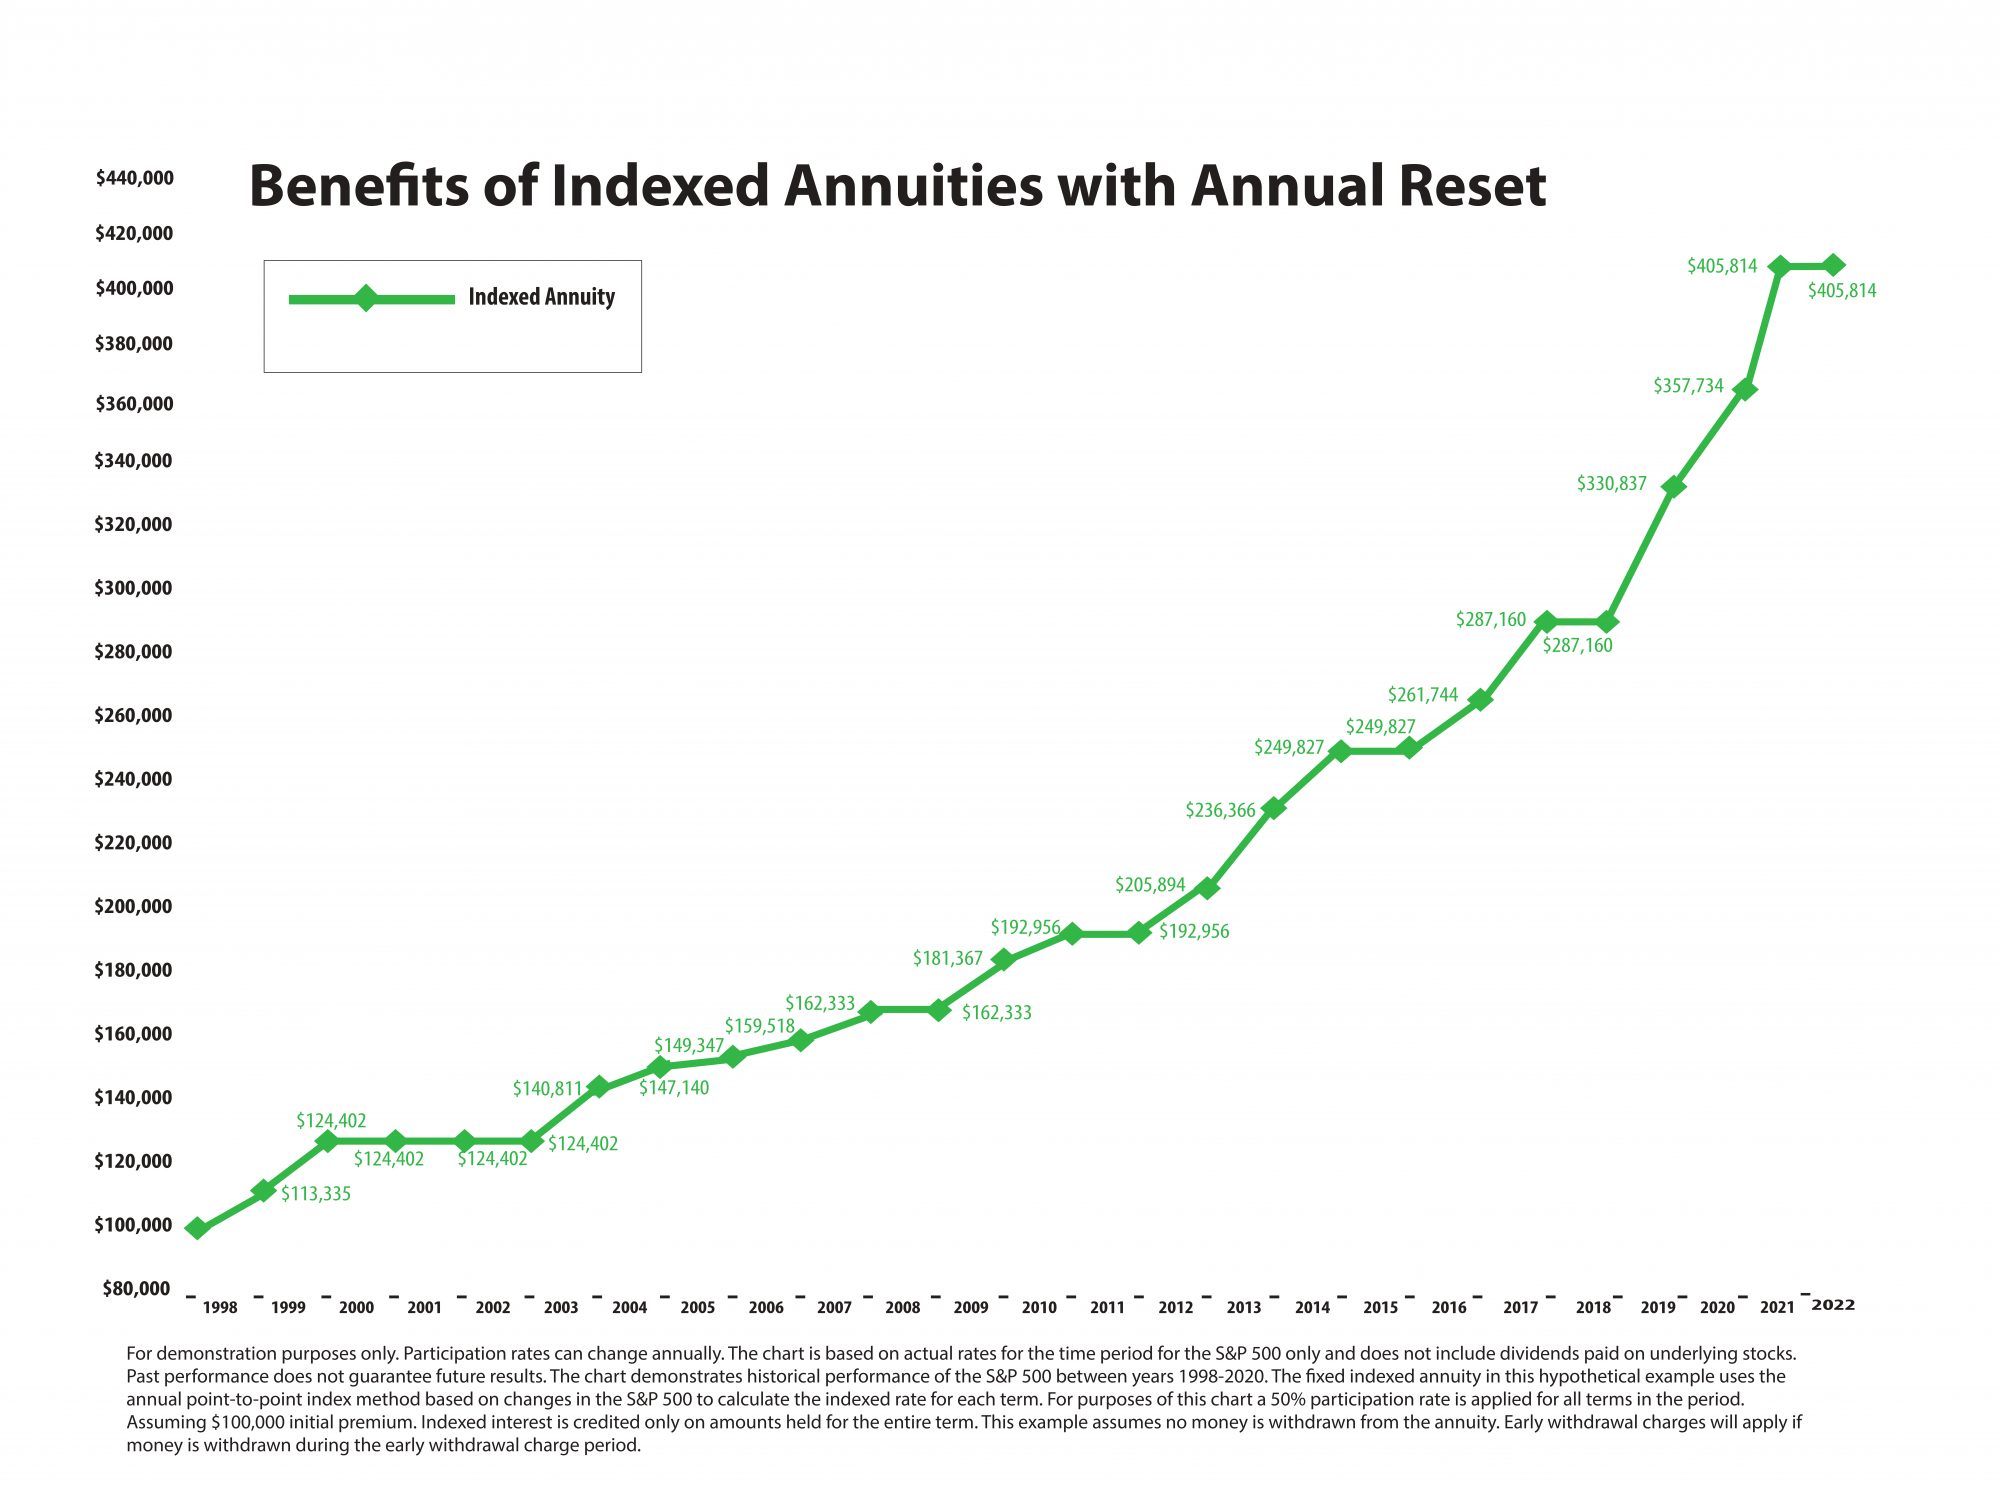 Green Line Benefits of Indexed Annuities with Annual Reset